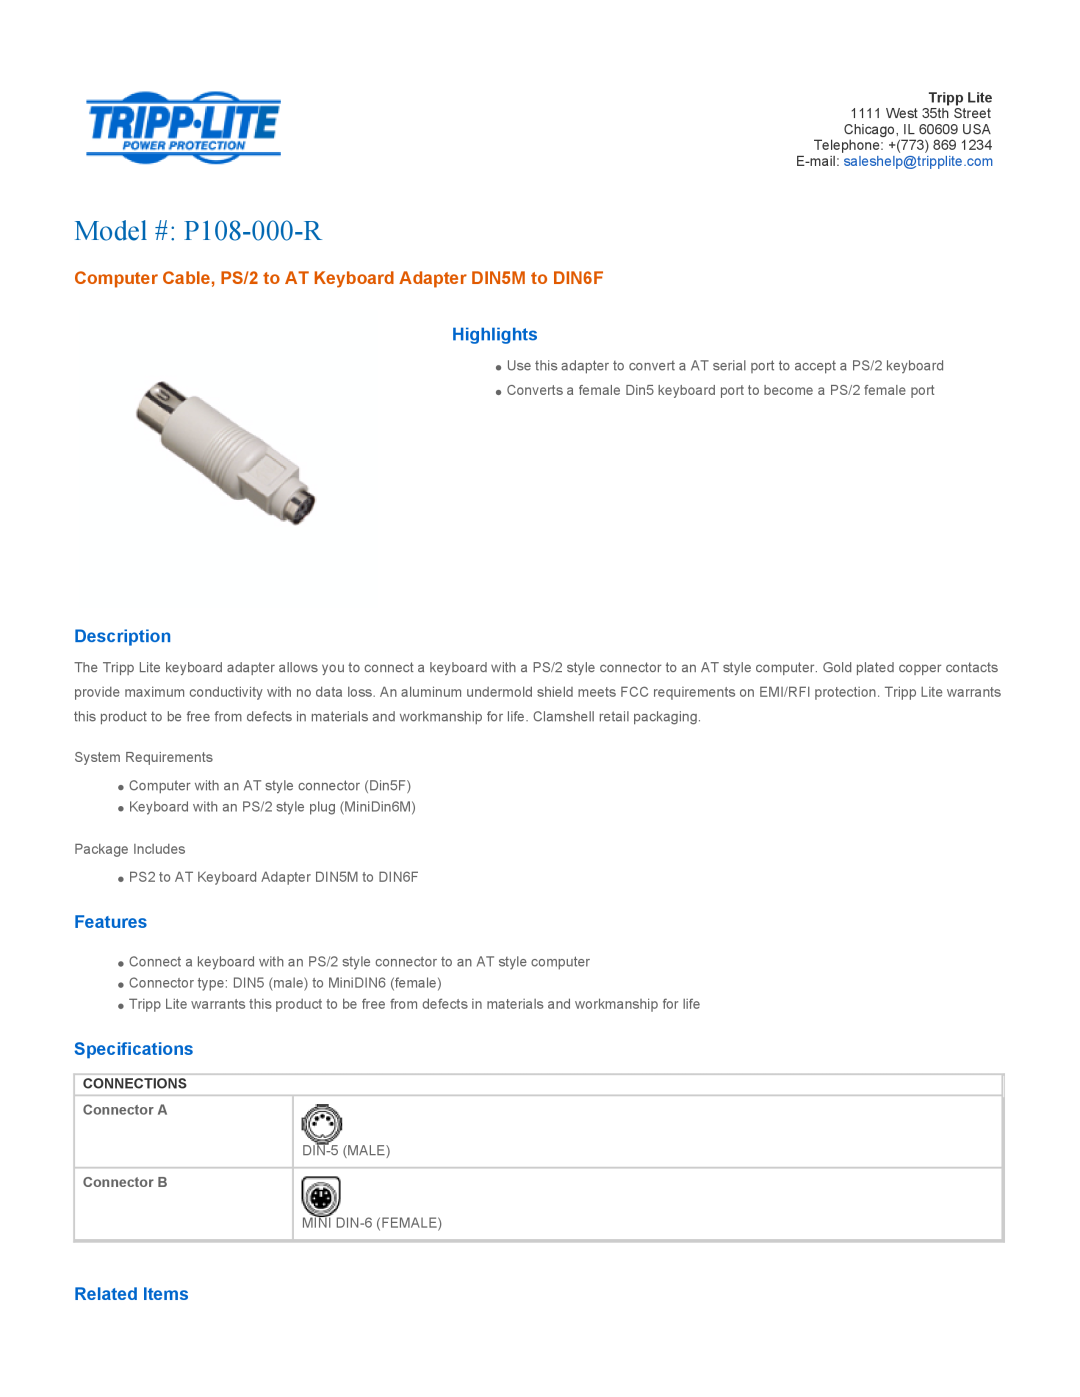 Tripp Lite p108-000-r specifications Connections, Model # P108-000-R, Highlights, Description, Features, Specifications 